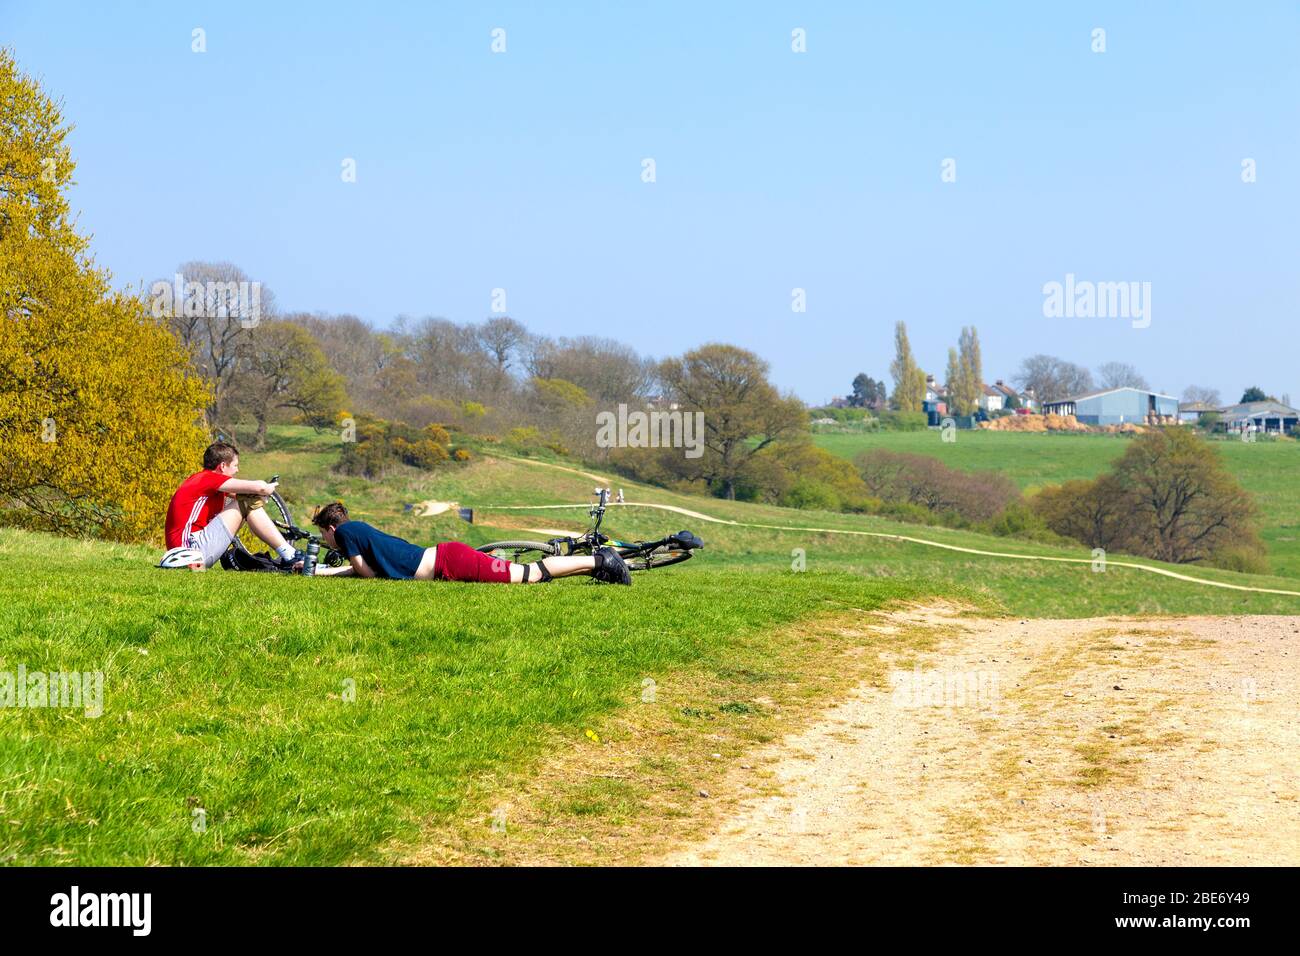 Cyclists resting on the grass at Hadleigh Park, Essex, UK Stock Photo